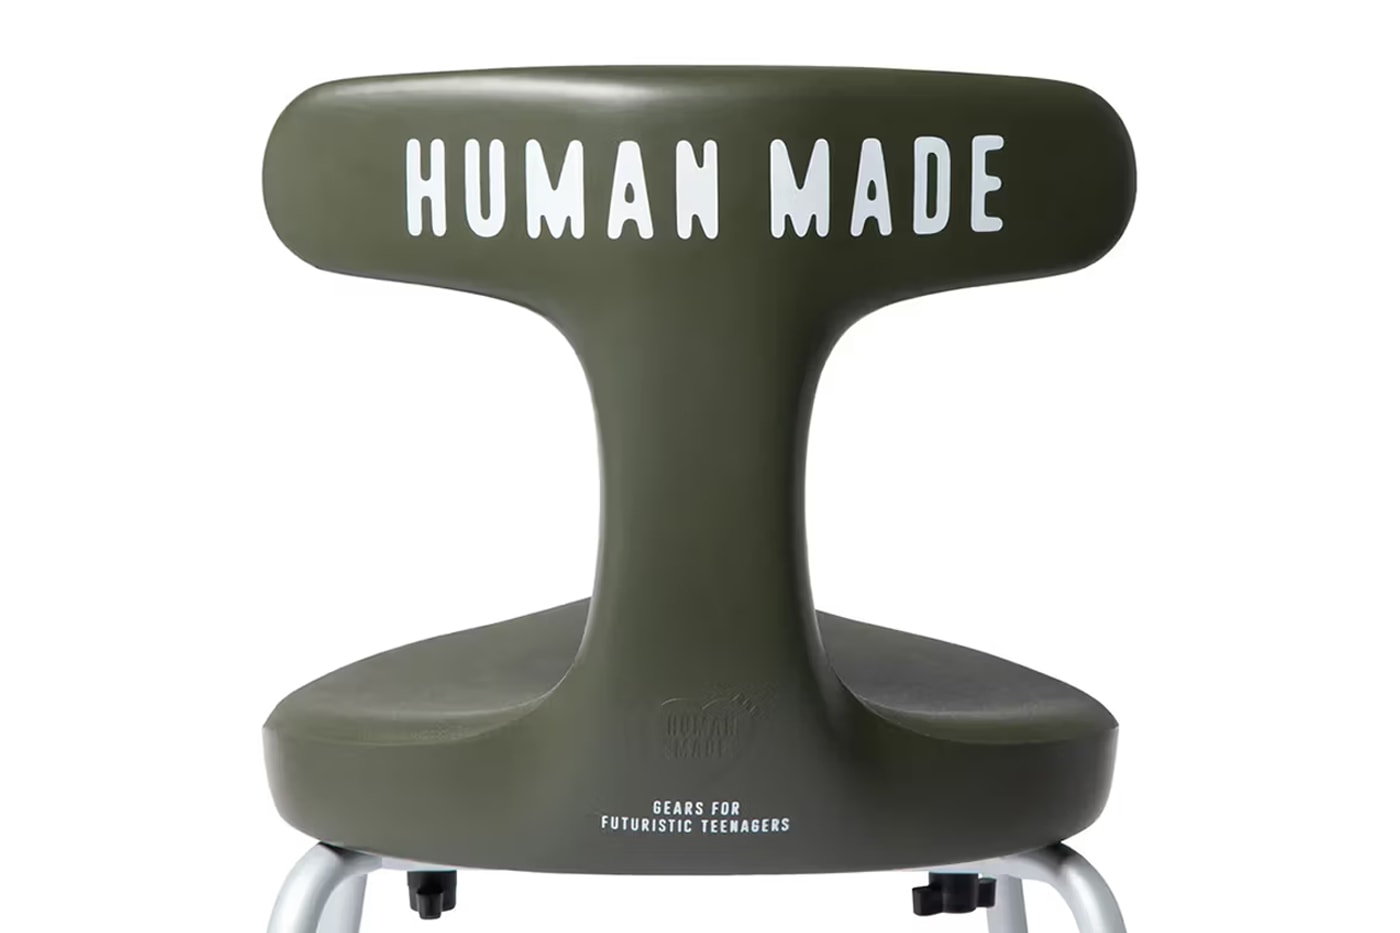 HUMAN MADE ayur chair Collaboration Olive Drab Colorway Release Info